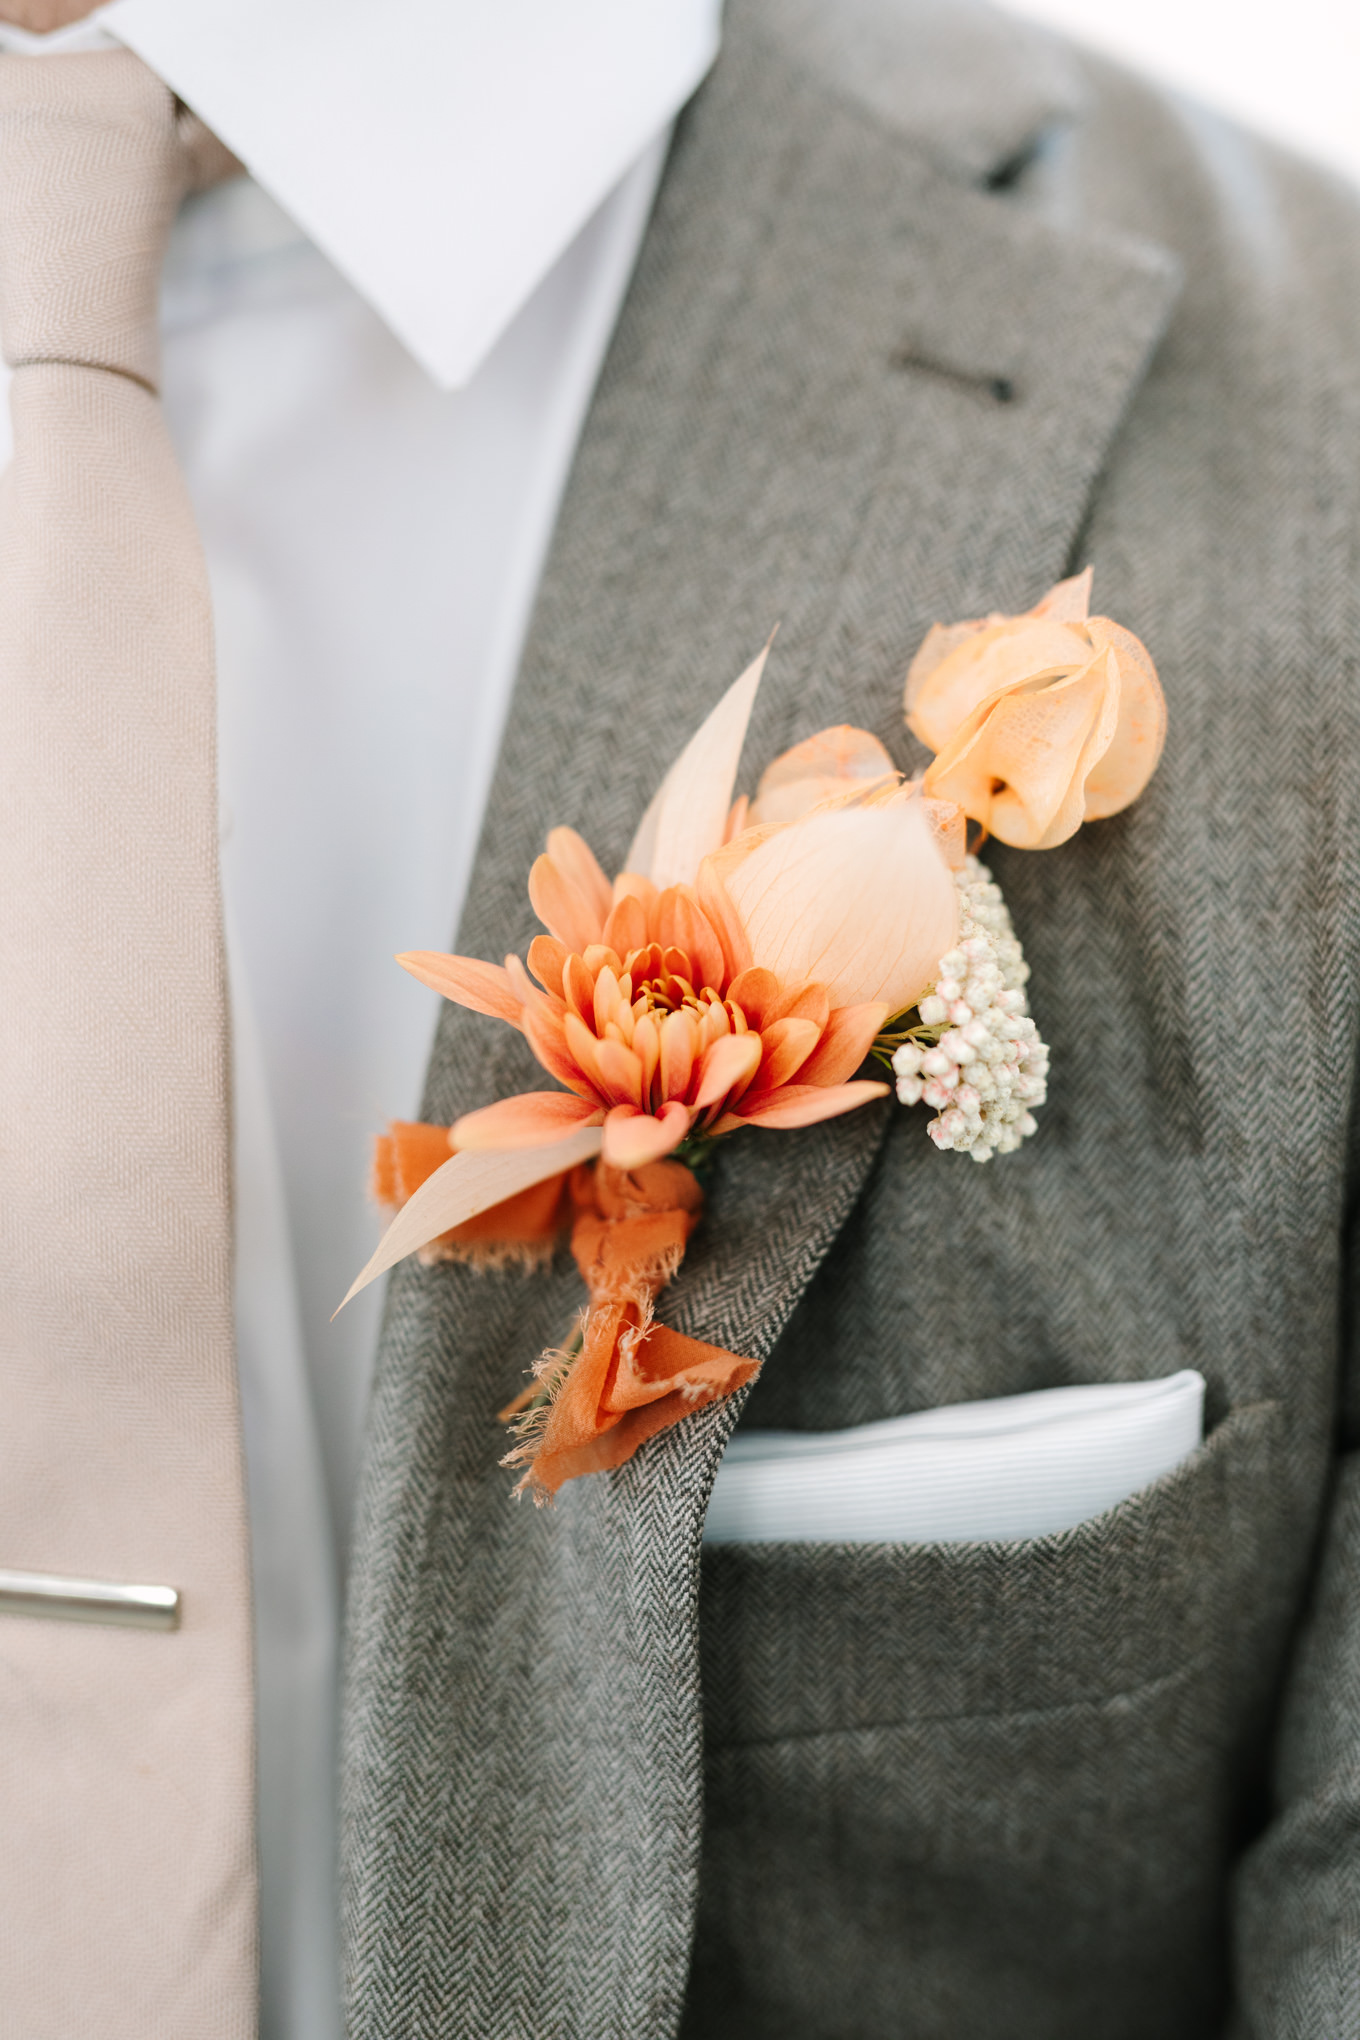 Boutonnière close up | Pink and orange Lautner Compound wedding | Colorful Palm Springs wedding photography | #palmspringsphotographer #palmspringswedding #lautnercompound #southerncaliforniawedding  Source: Mary Costa Photography | Los Angeles